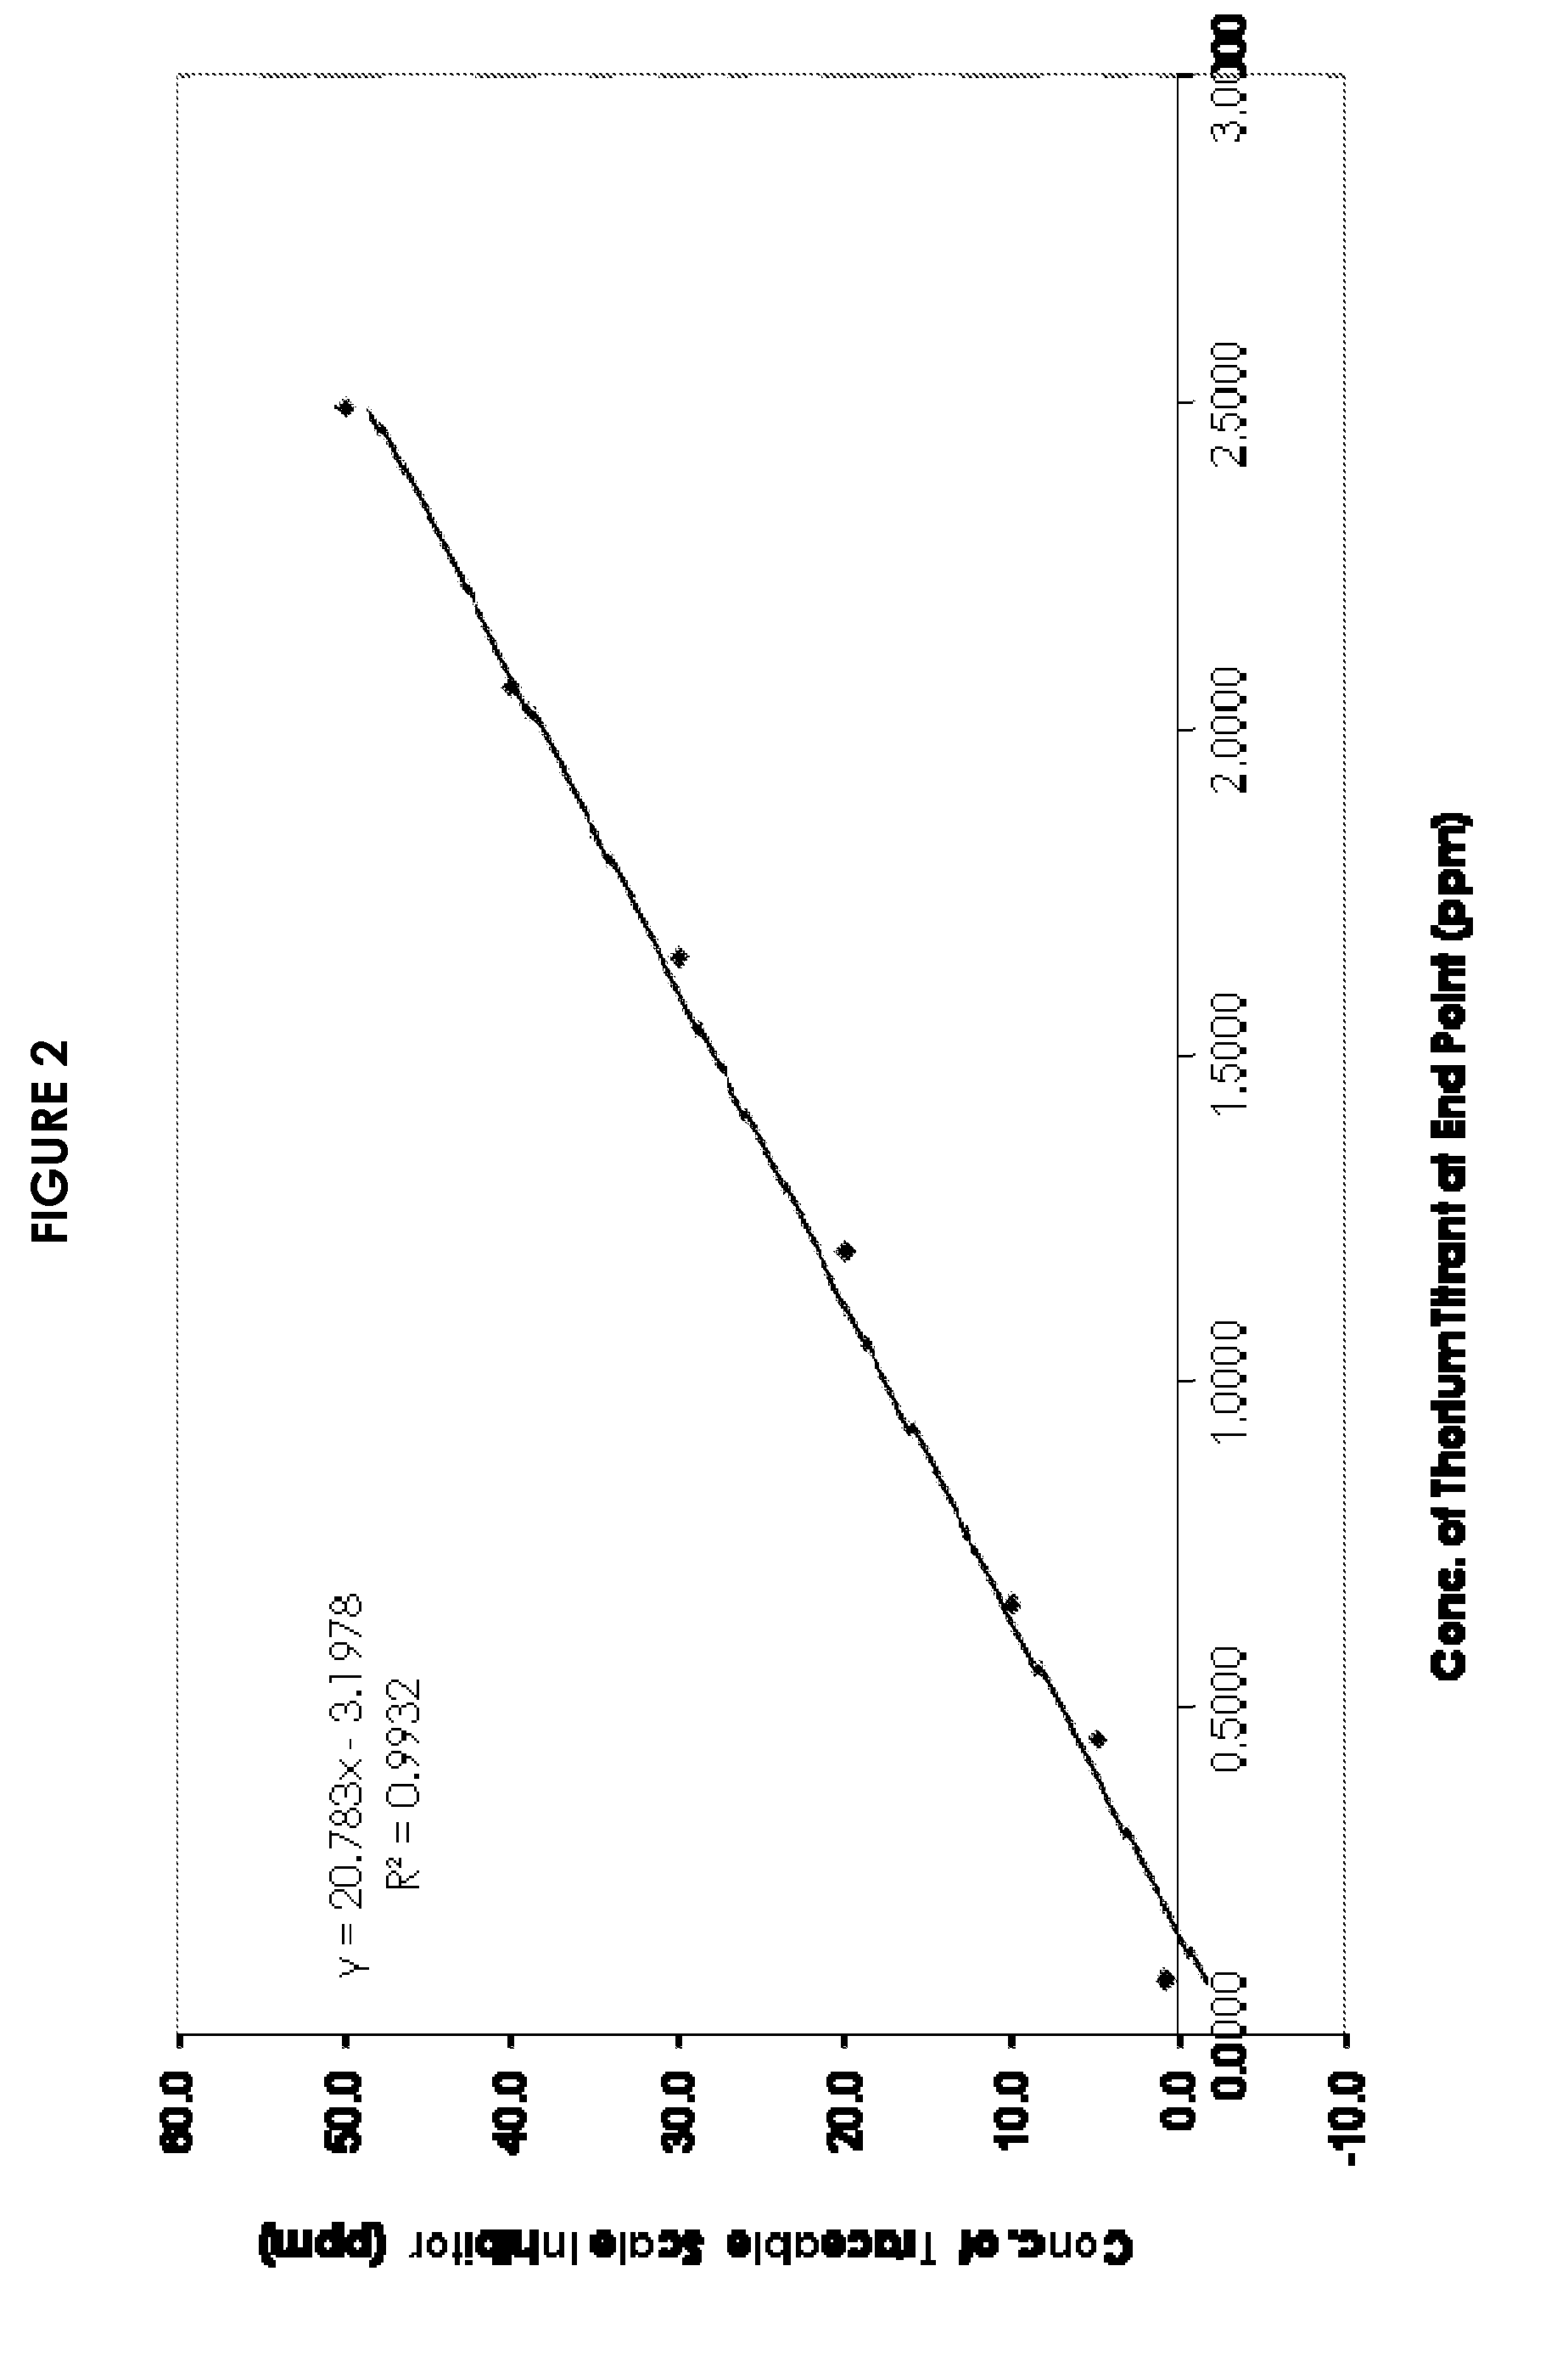 Traceable polymeric scale inhibitors and methods of using such scale inhibitors